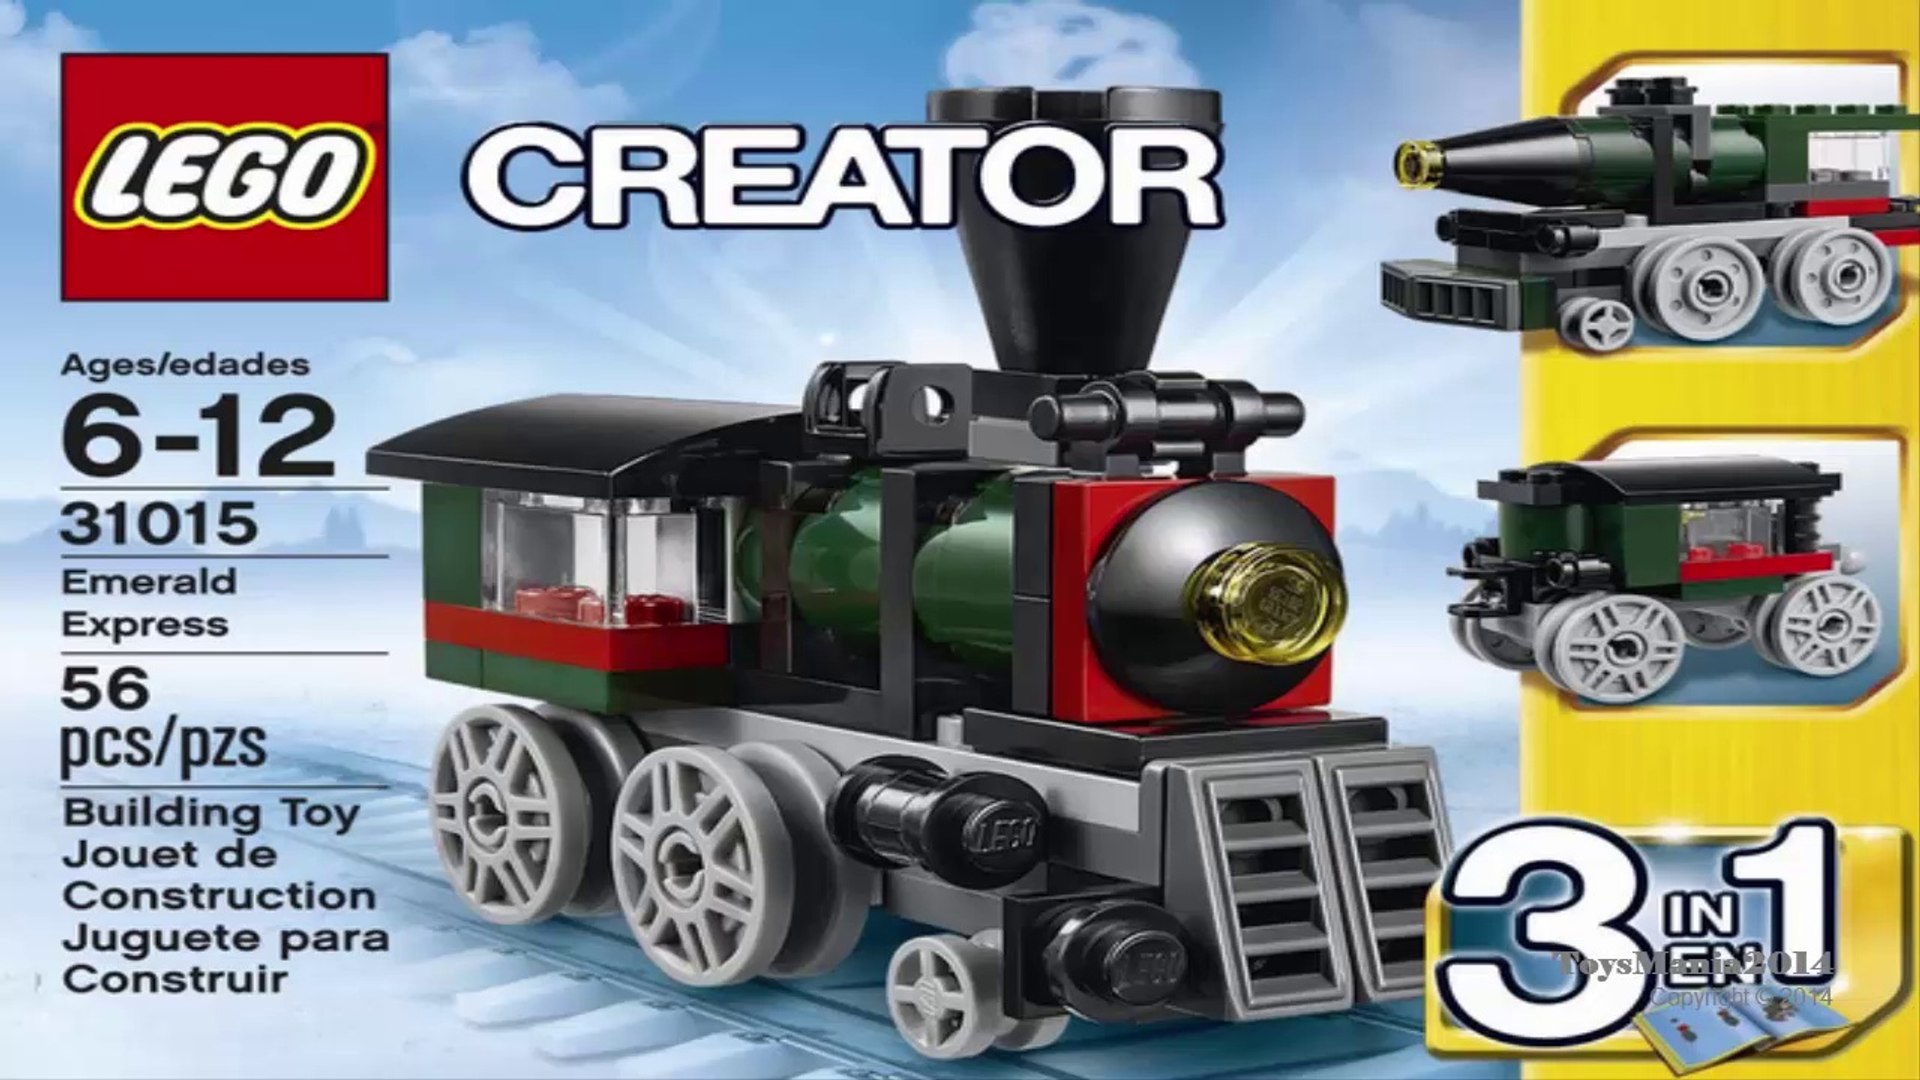 LEGO Creator Emerald Express steam train 31015 - 3 IN 1 (Express steam  train, Fast Rocket Train or a Carriage) - Toys Review - video Dailymotion